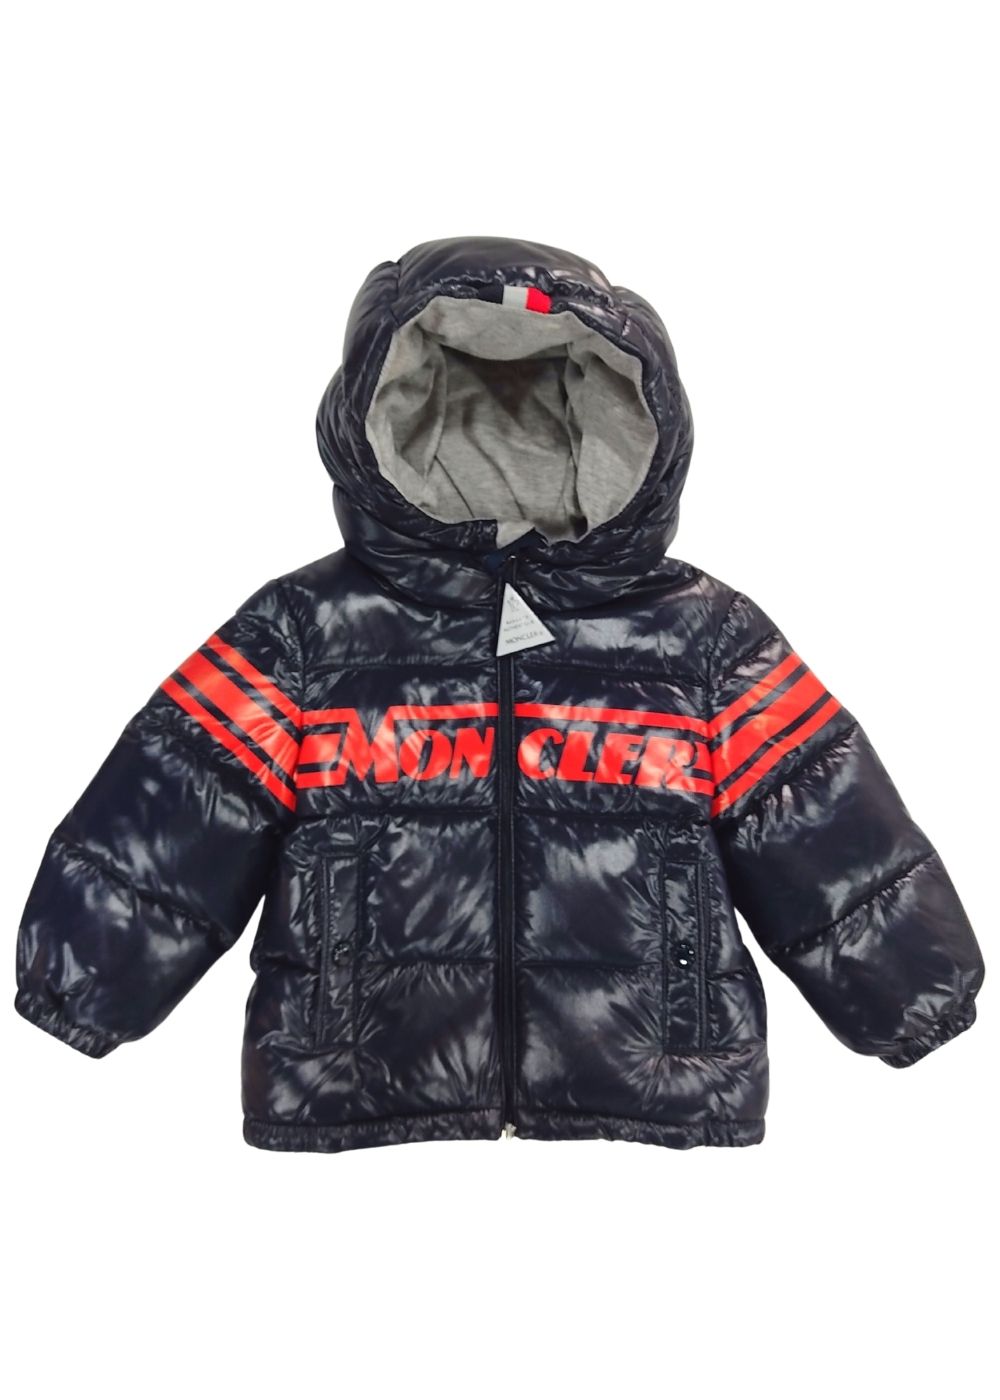 Featured image for “MONCLER NASSE”